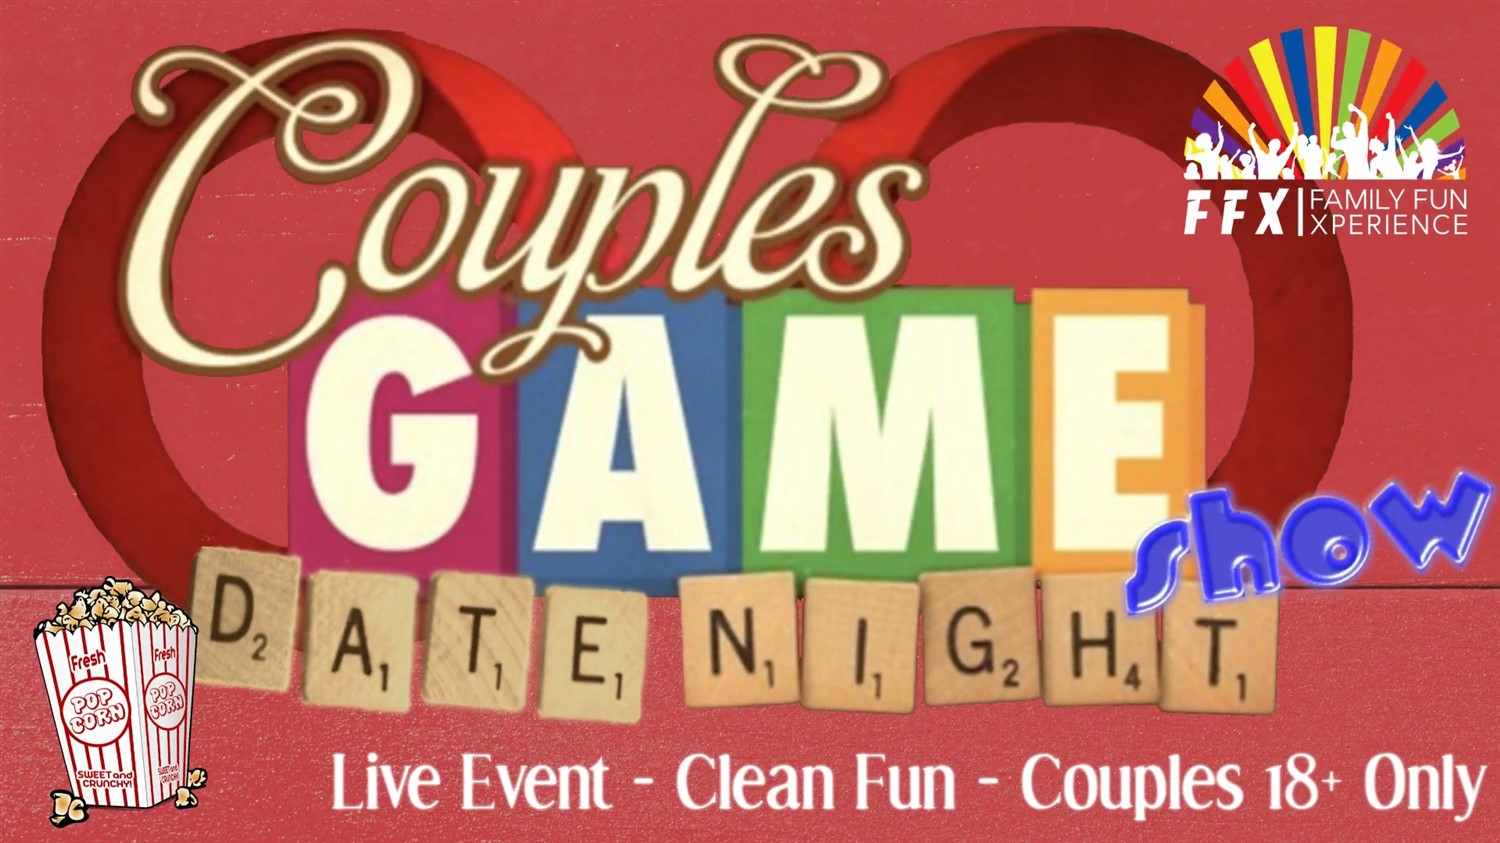 Couples Date Night Game Show! Live Game Show - Couples Only - Date Night FUN! on Aug 25, 19:00@FFX Theatre - Pick a seat, Buy tickets and Get information on Family Fun Xperience tickets.ffxshow.org